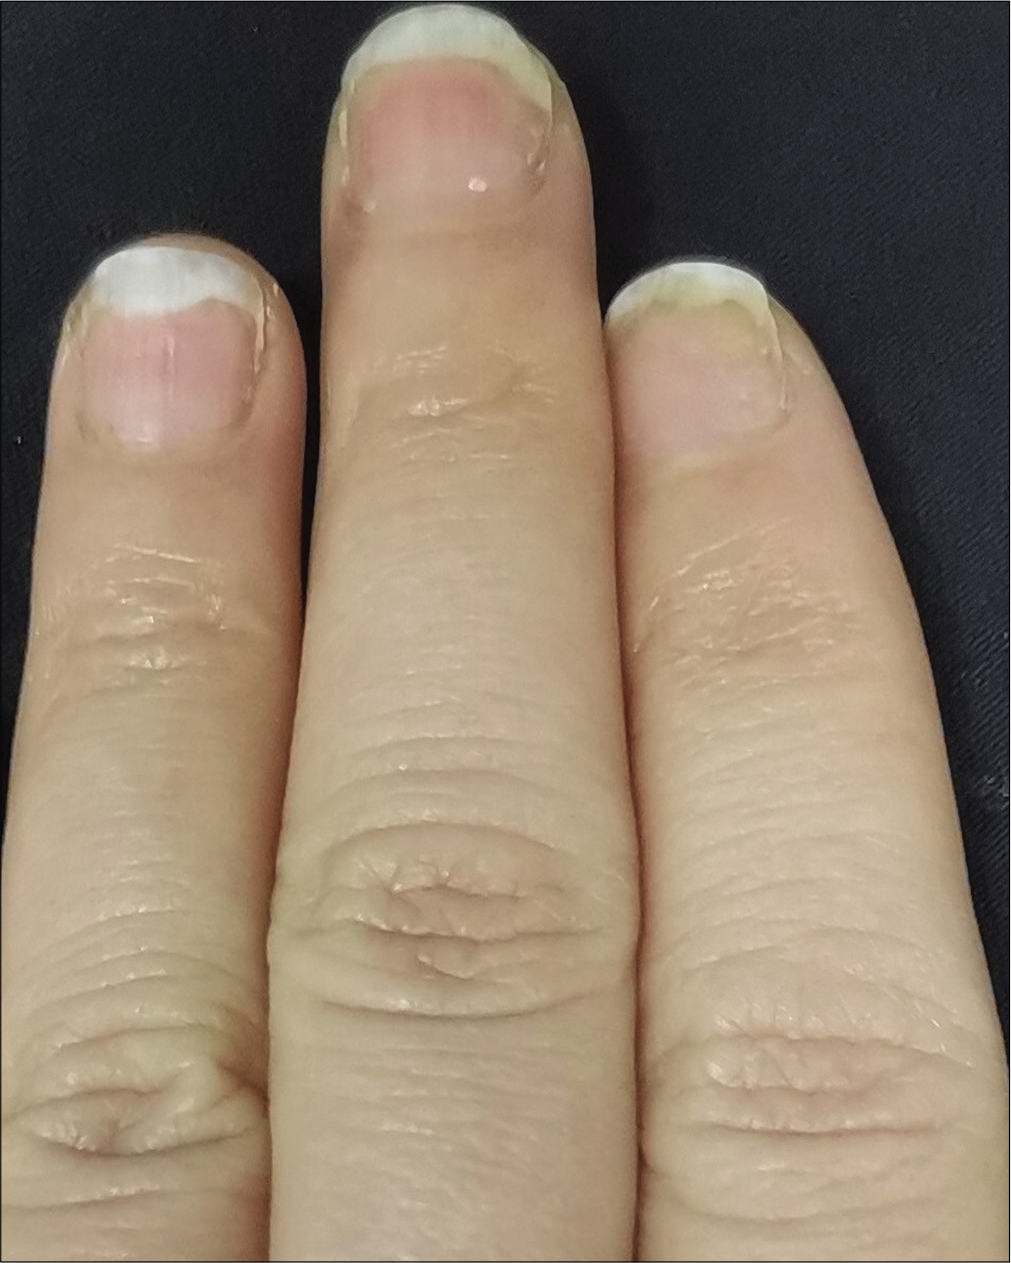 Intramatricial low-dose secukinumab injection for nail psoriasis ...